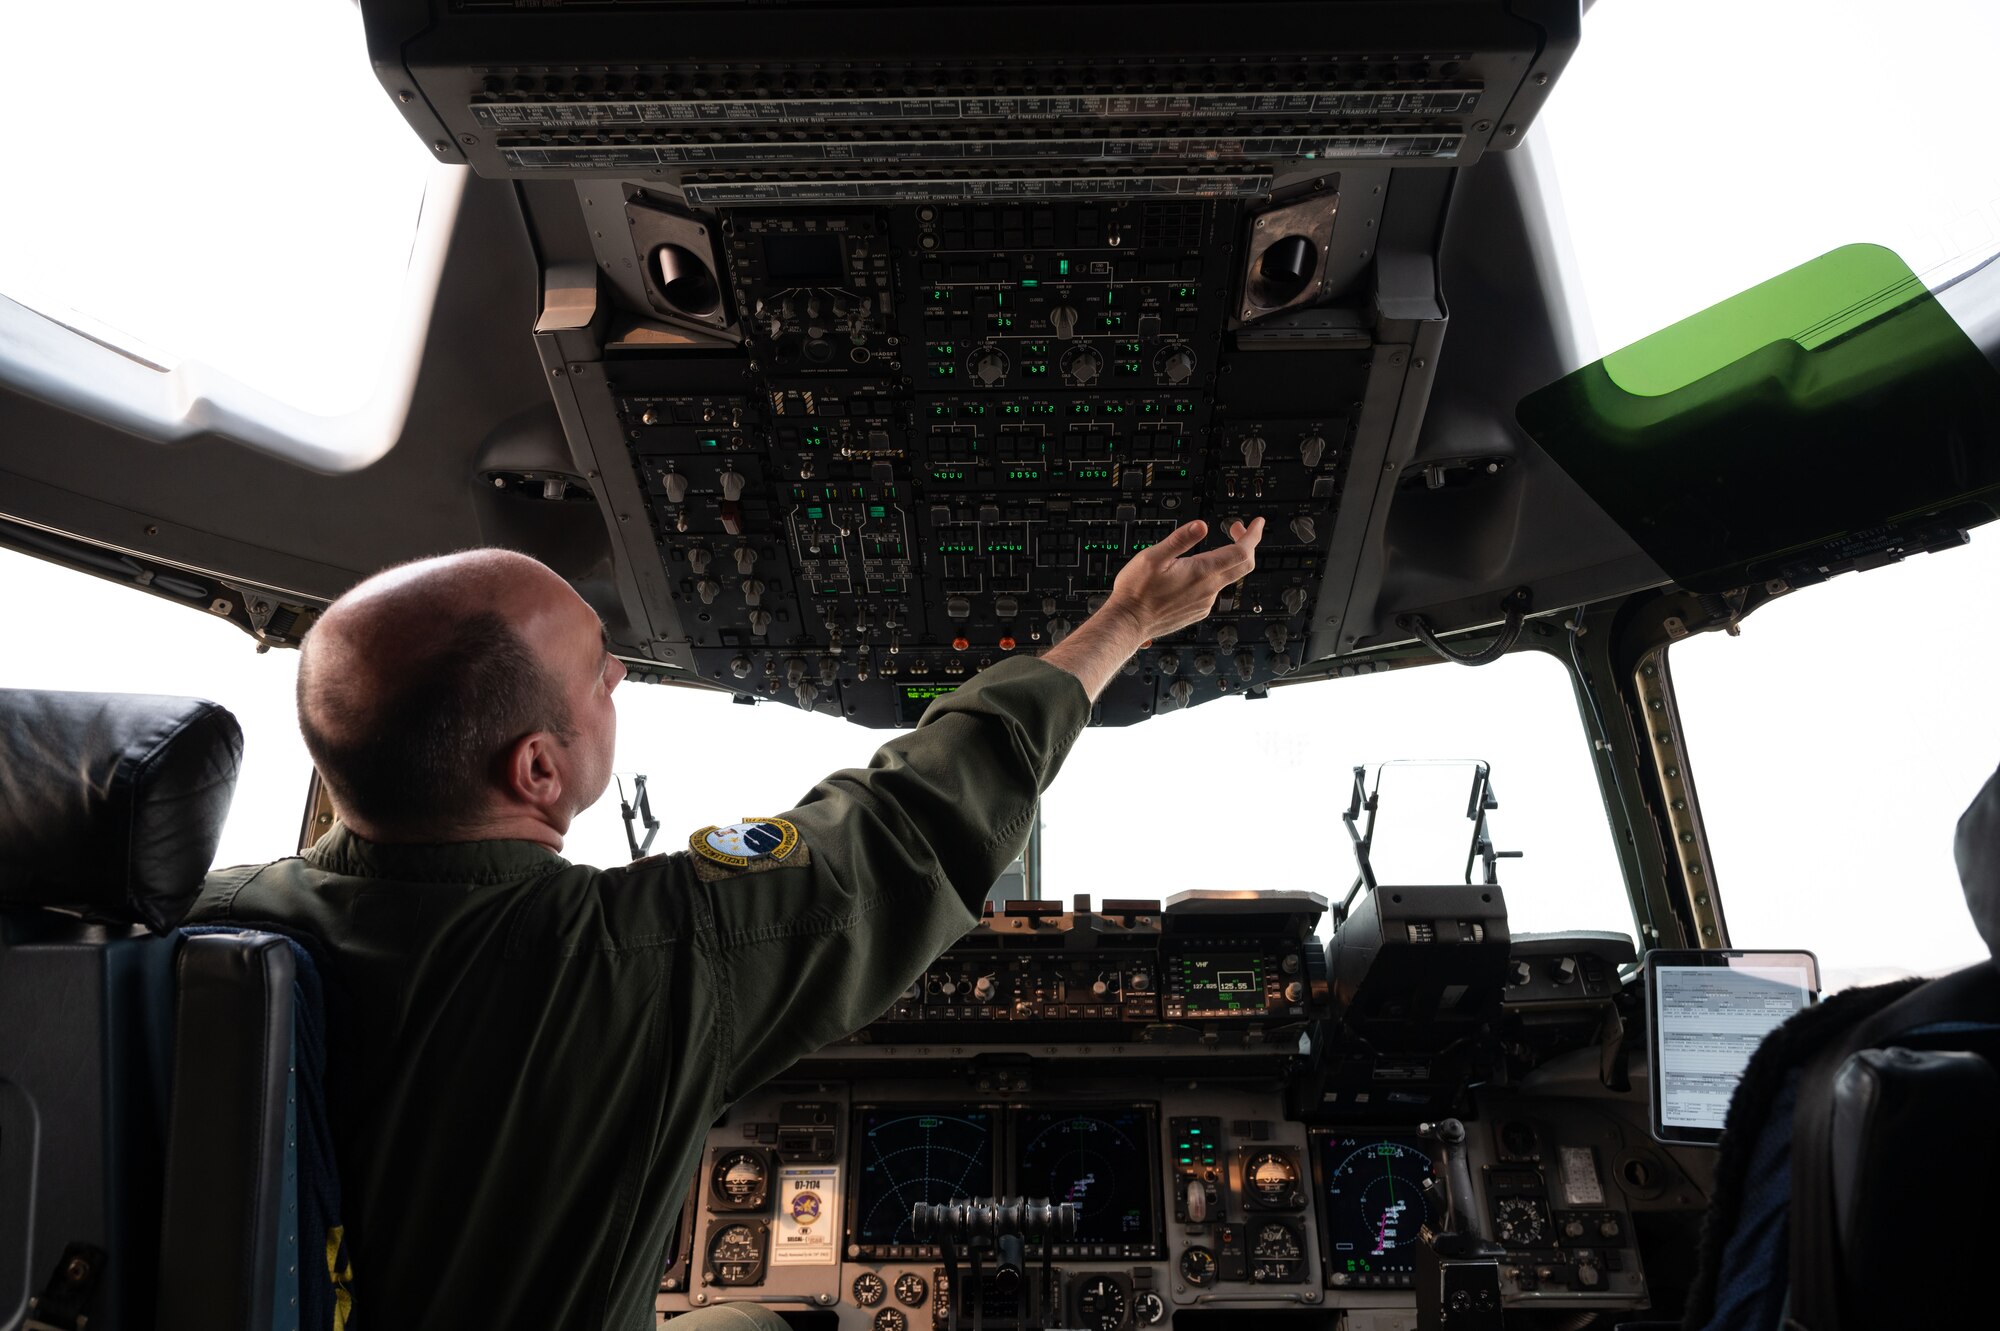 Maj. William Wilkerson, 326th Airlift Squadron instructor pilot, performs preflight checks on a C-17 Globemaster III during the 2023 hurricane evacuation exercise at Dover Air Force Base, Delaware, June 6, 2023. The C-17 was one of six Globemaster IIIs that departed Dover AFB during the hurricane evacuation exercise. (U.S. Air Force photo by Airman 1st Class Amanda Jett)